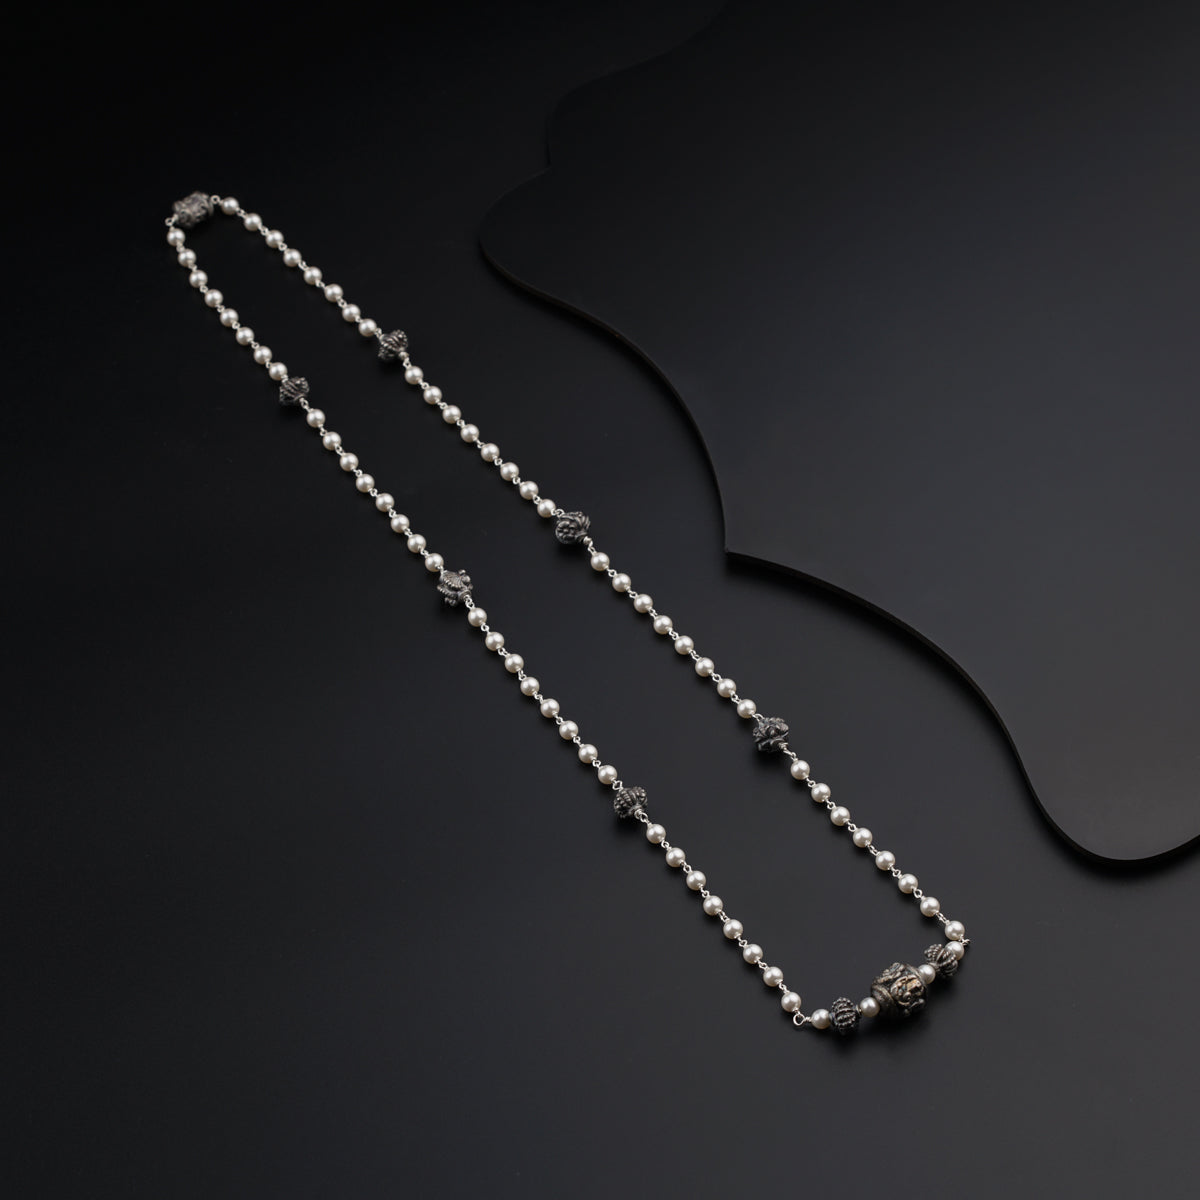 a silver chain with beads on a black surface